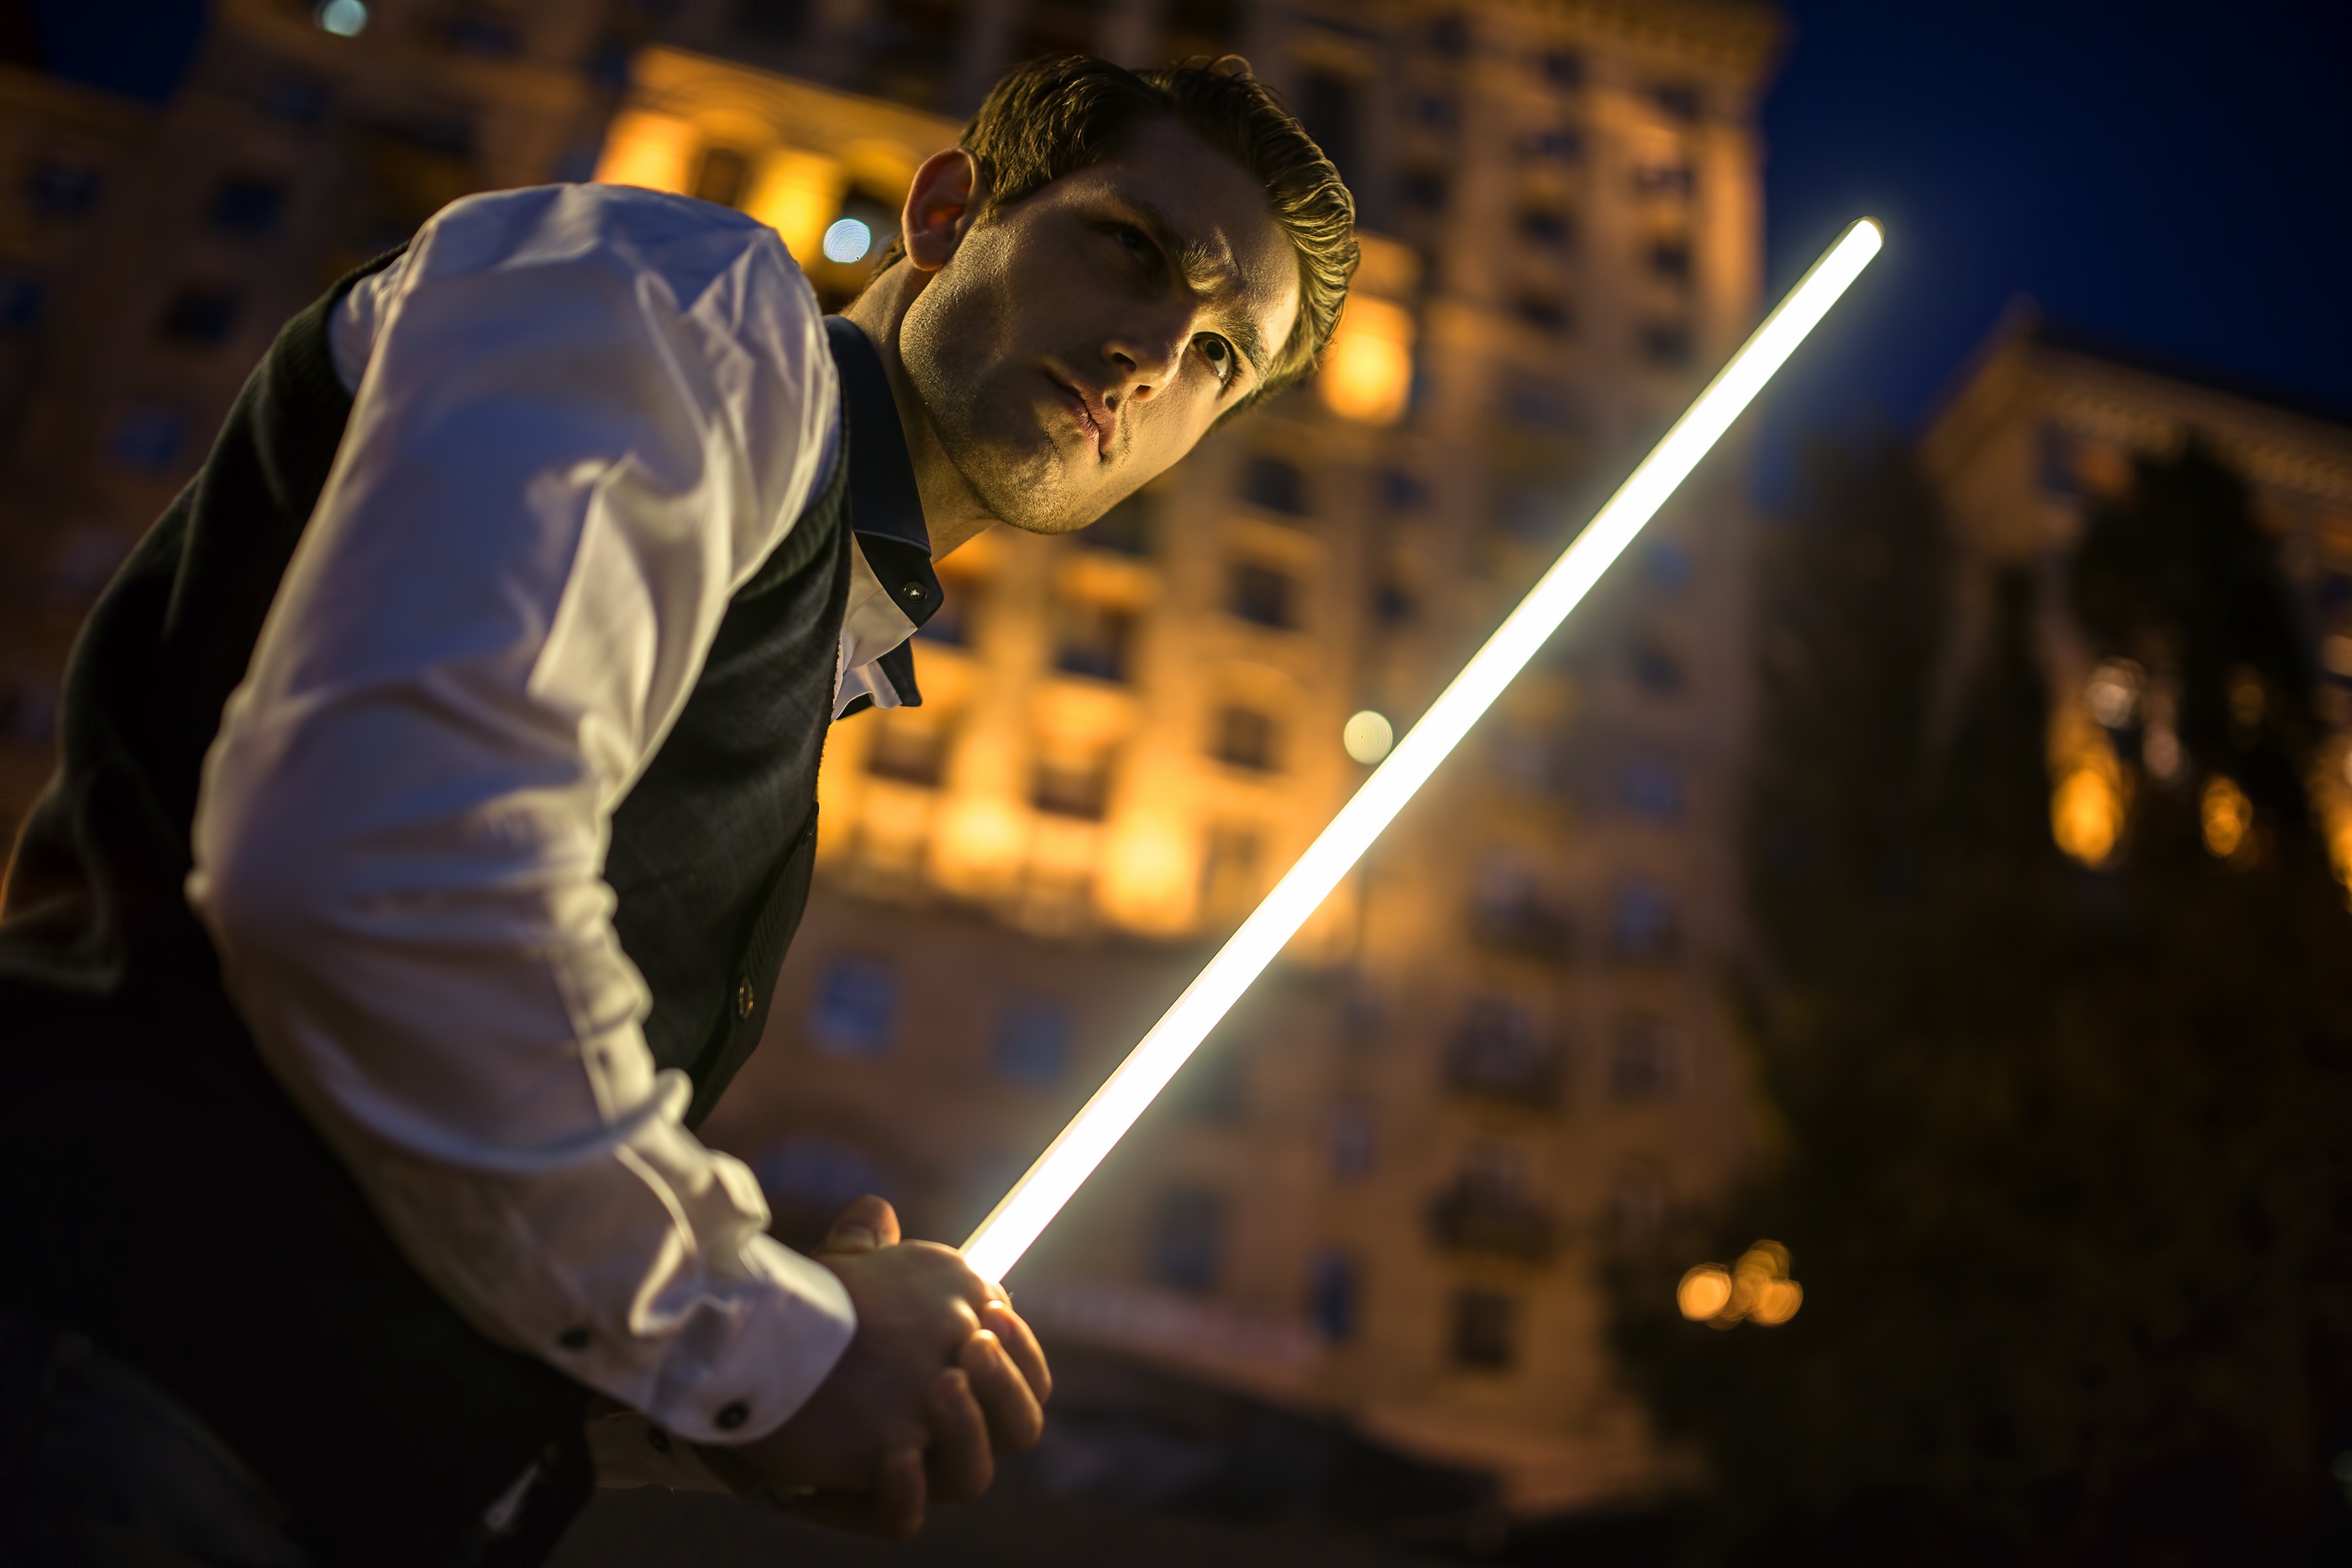 STEMscopes Asks: Lightsabers—A New Possibility or an Item Strictly for Science Fiction?